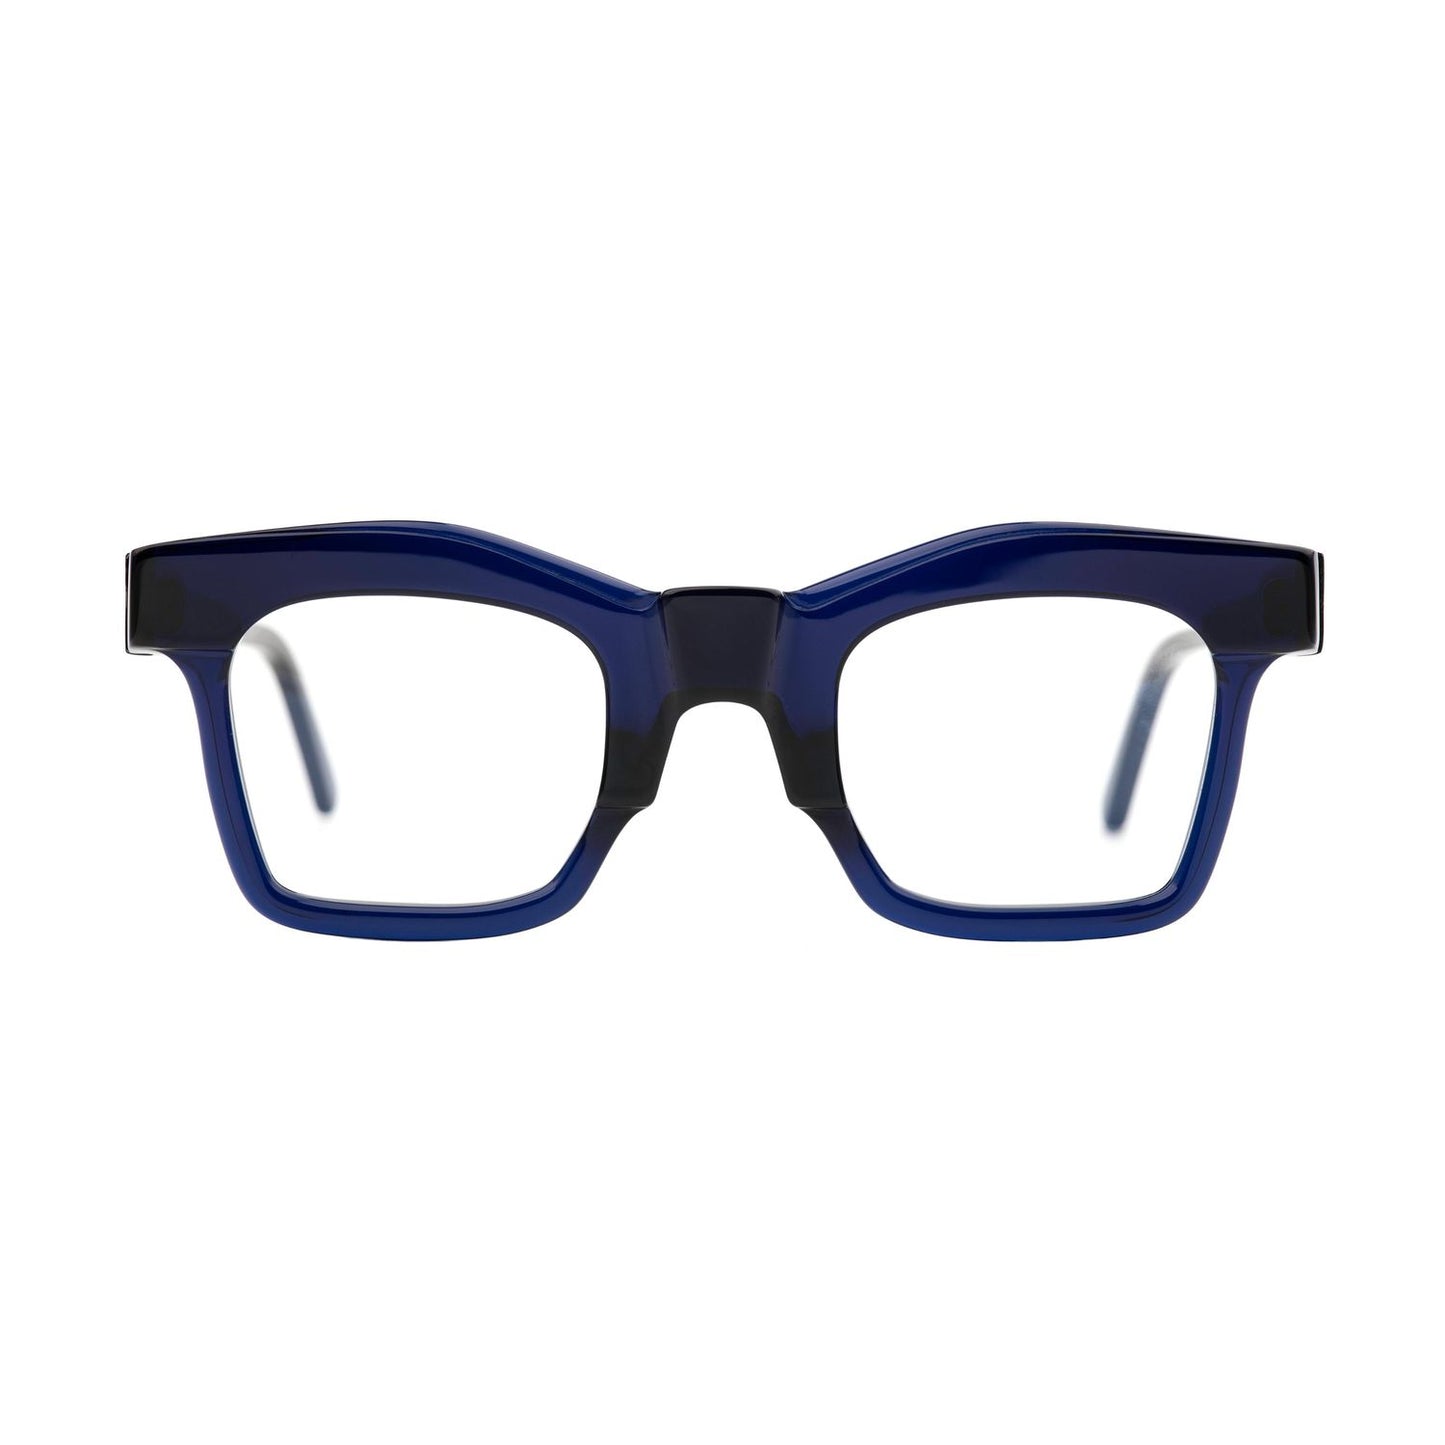 <p> Kuboraum MASKE K21 is a  Black, Blue; Acetate Optical Frame with a Avant Garde shape.  </p><p>Shop with confidence from Adair Eyewear, a Kuboraum Authorized Dealer.  We have provided the best in customer service and great designer eyewear for over 40 years. Visit https://adaireyewearonline.com</p>